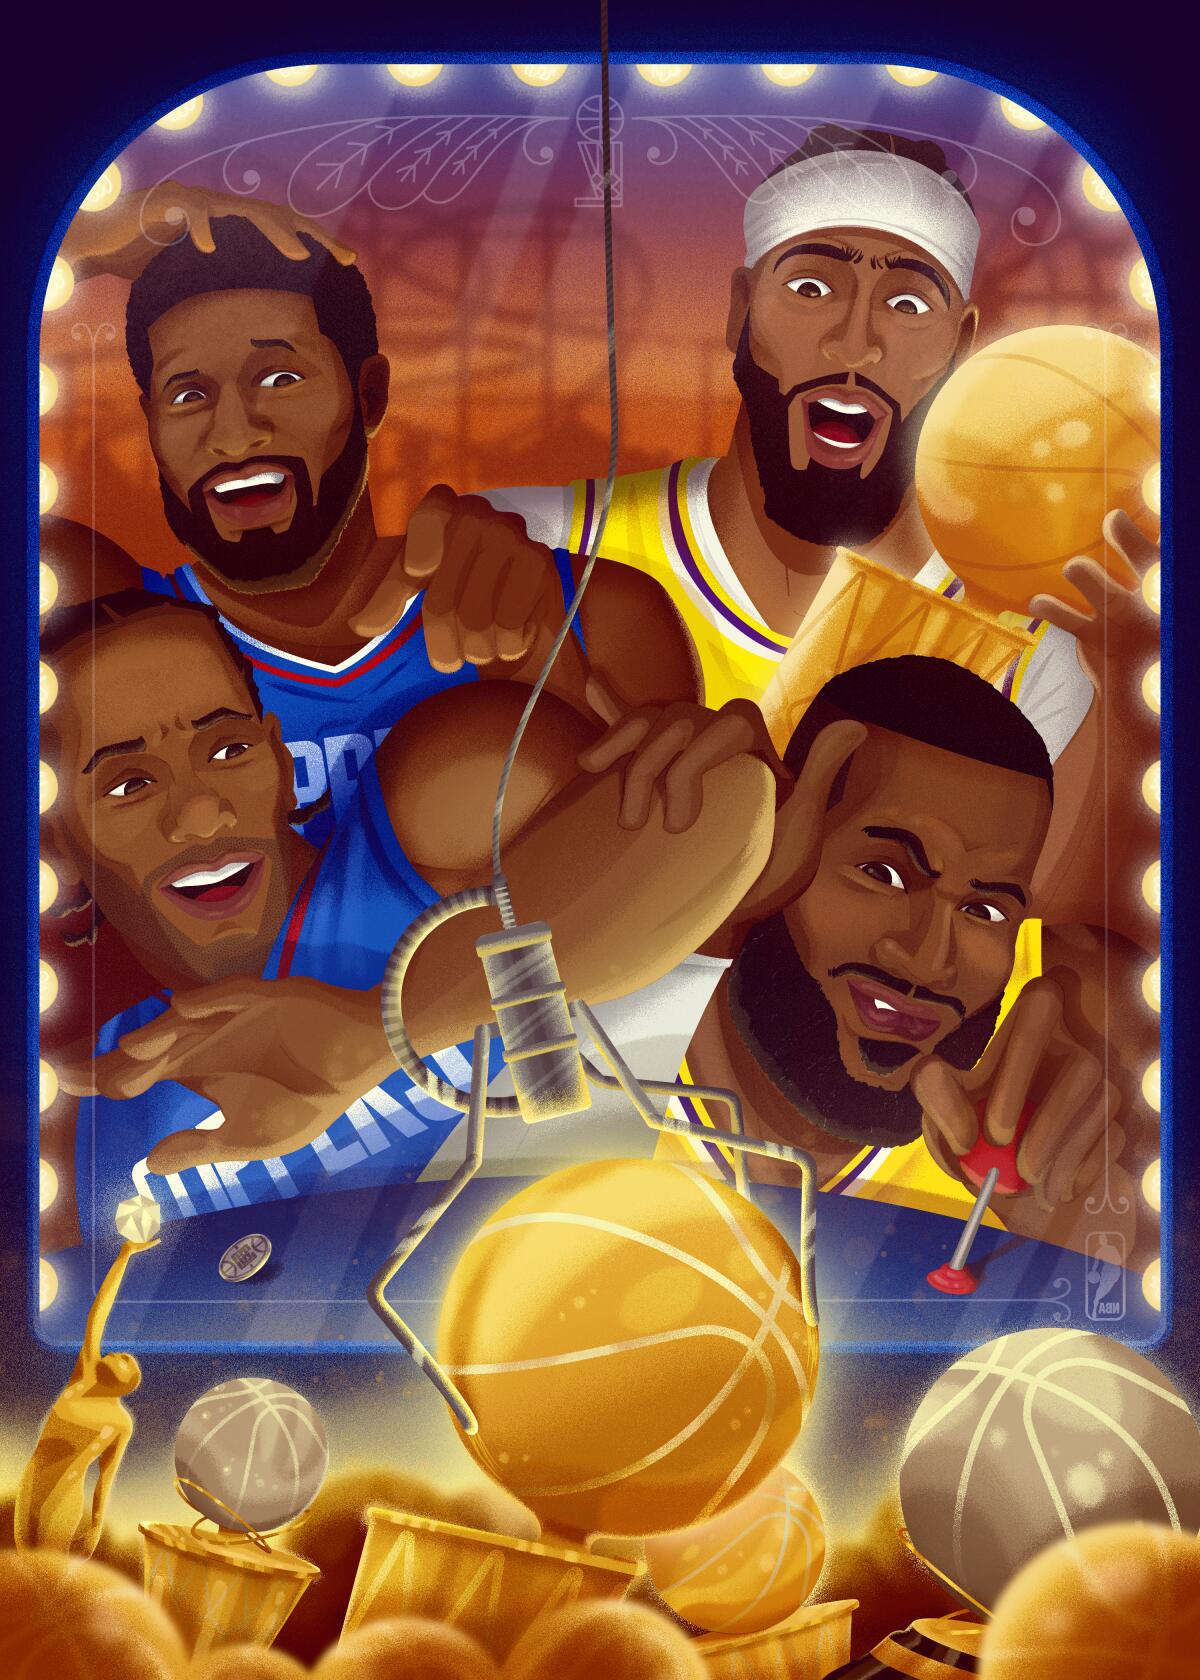 An illustration featuring Lakers and Clippers stars trying to pick out the championship trophy from a claw machine.